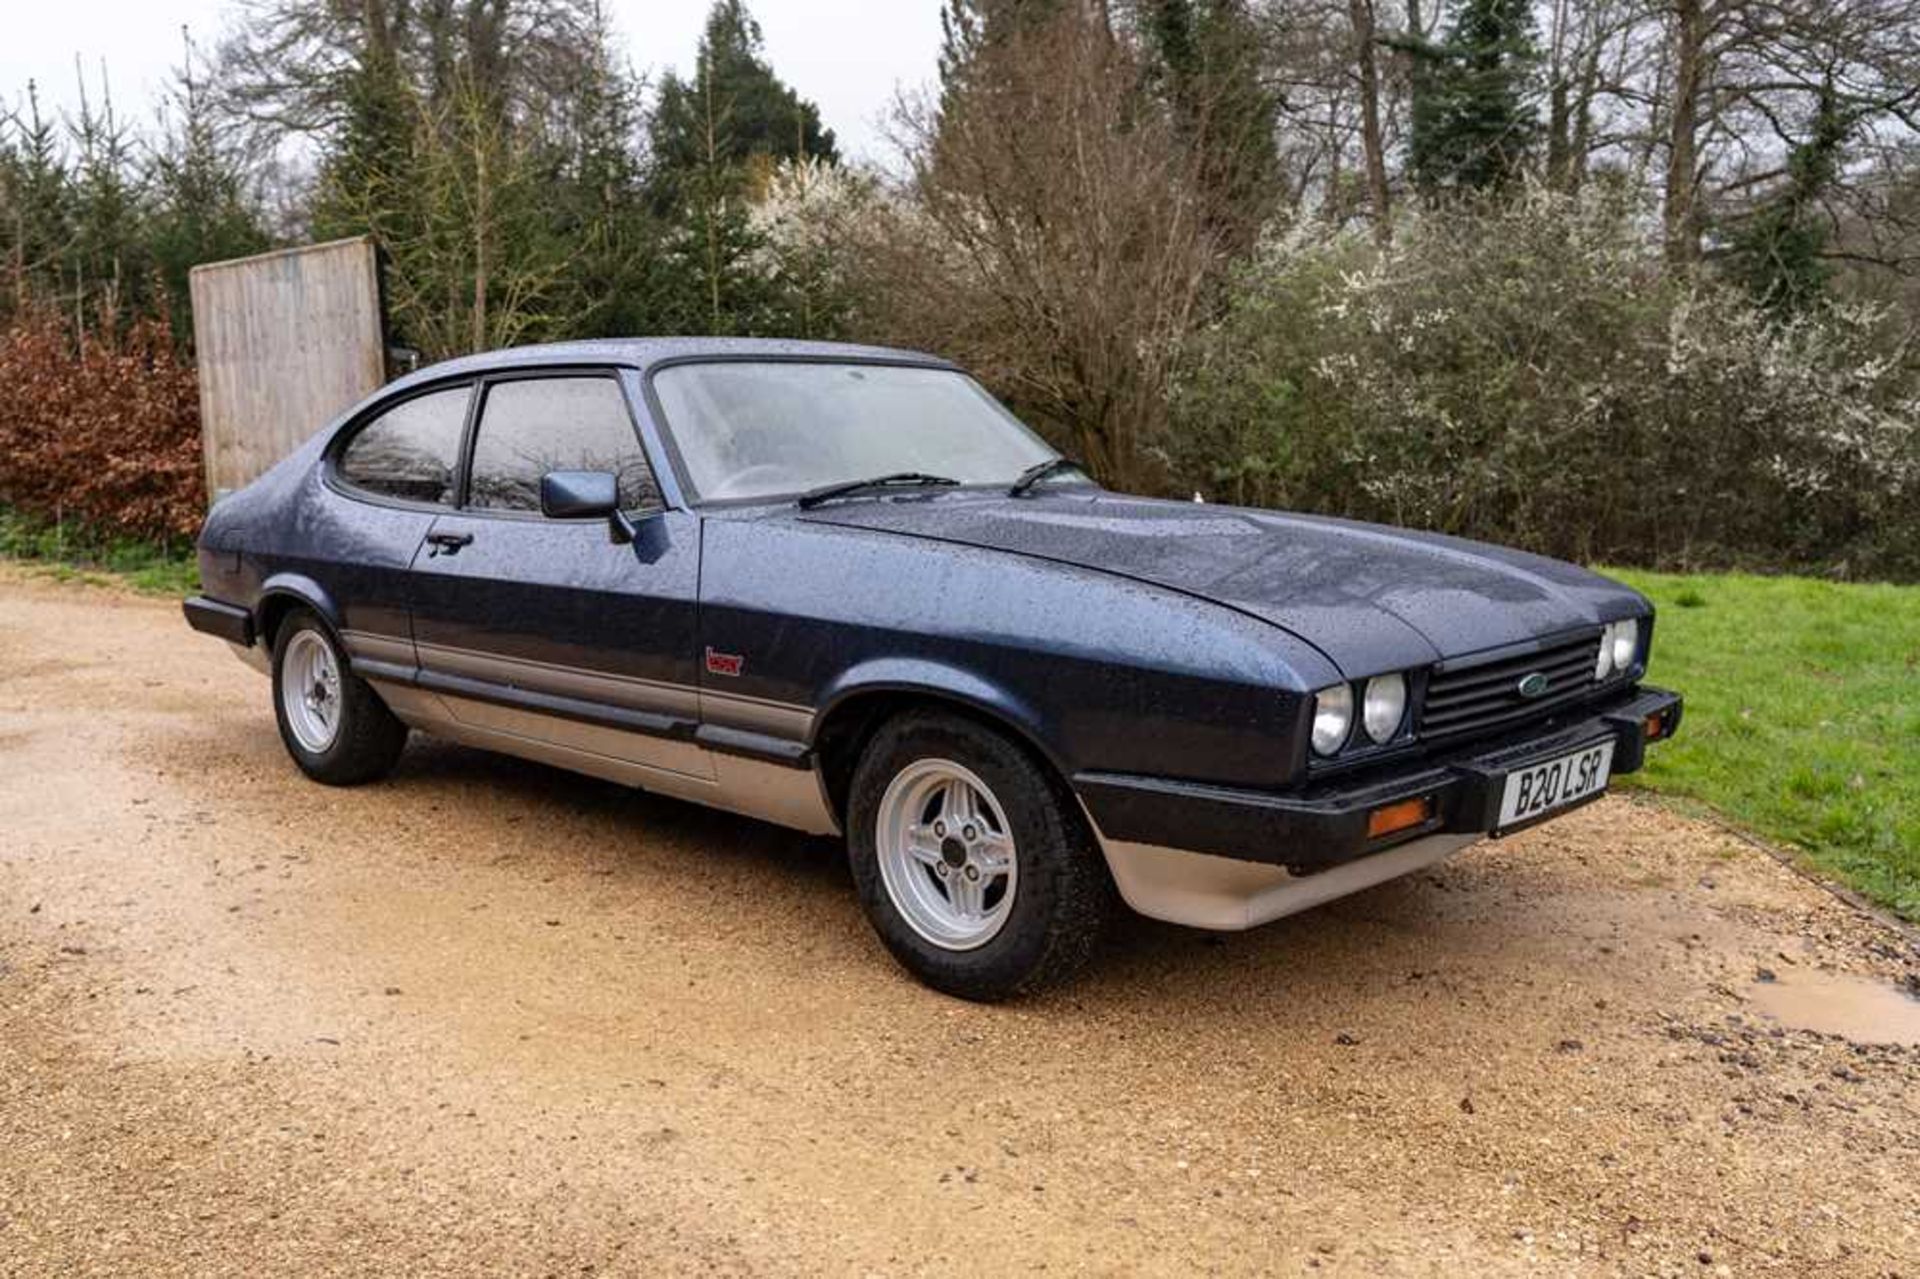 1985 Ford Capri Laser 2.0 Litre Warranted 55,300 miles from new - Image 6 of 67